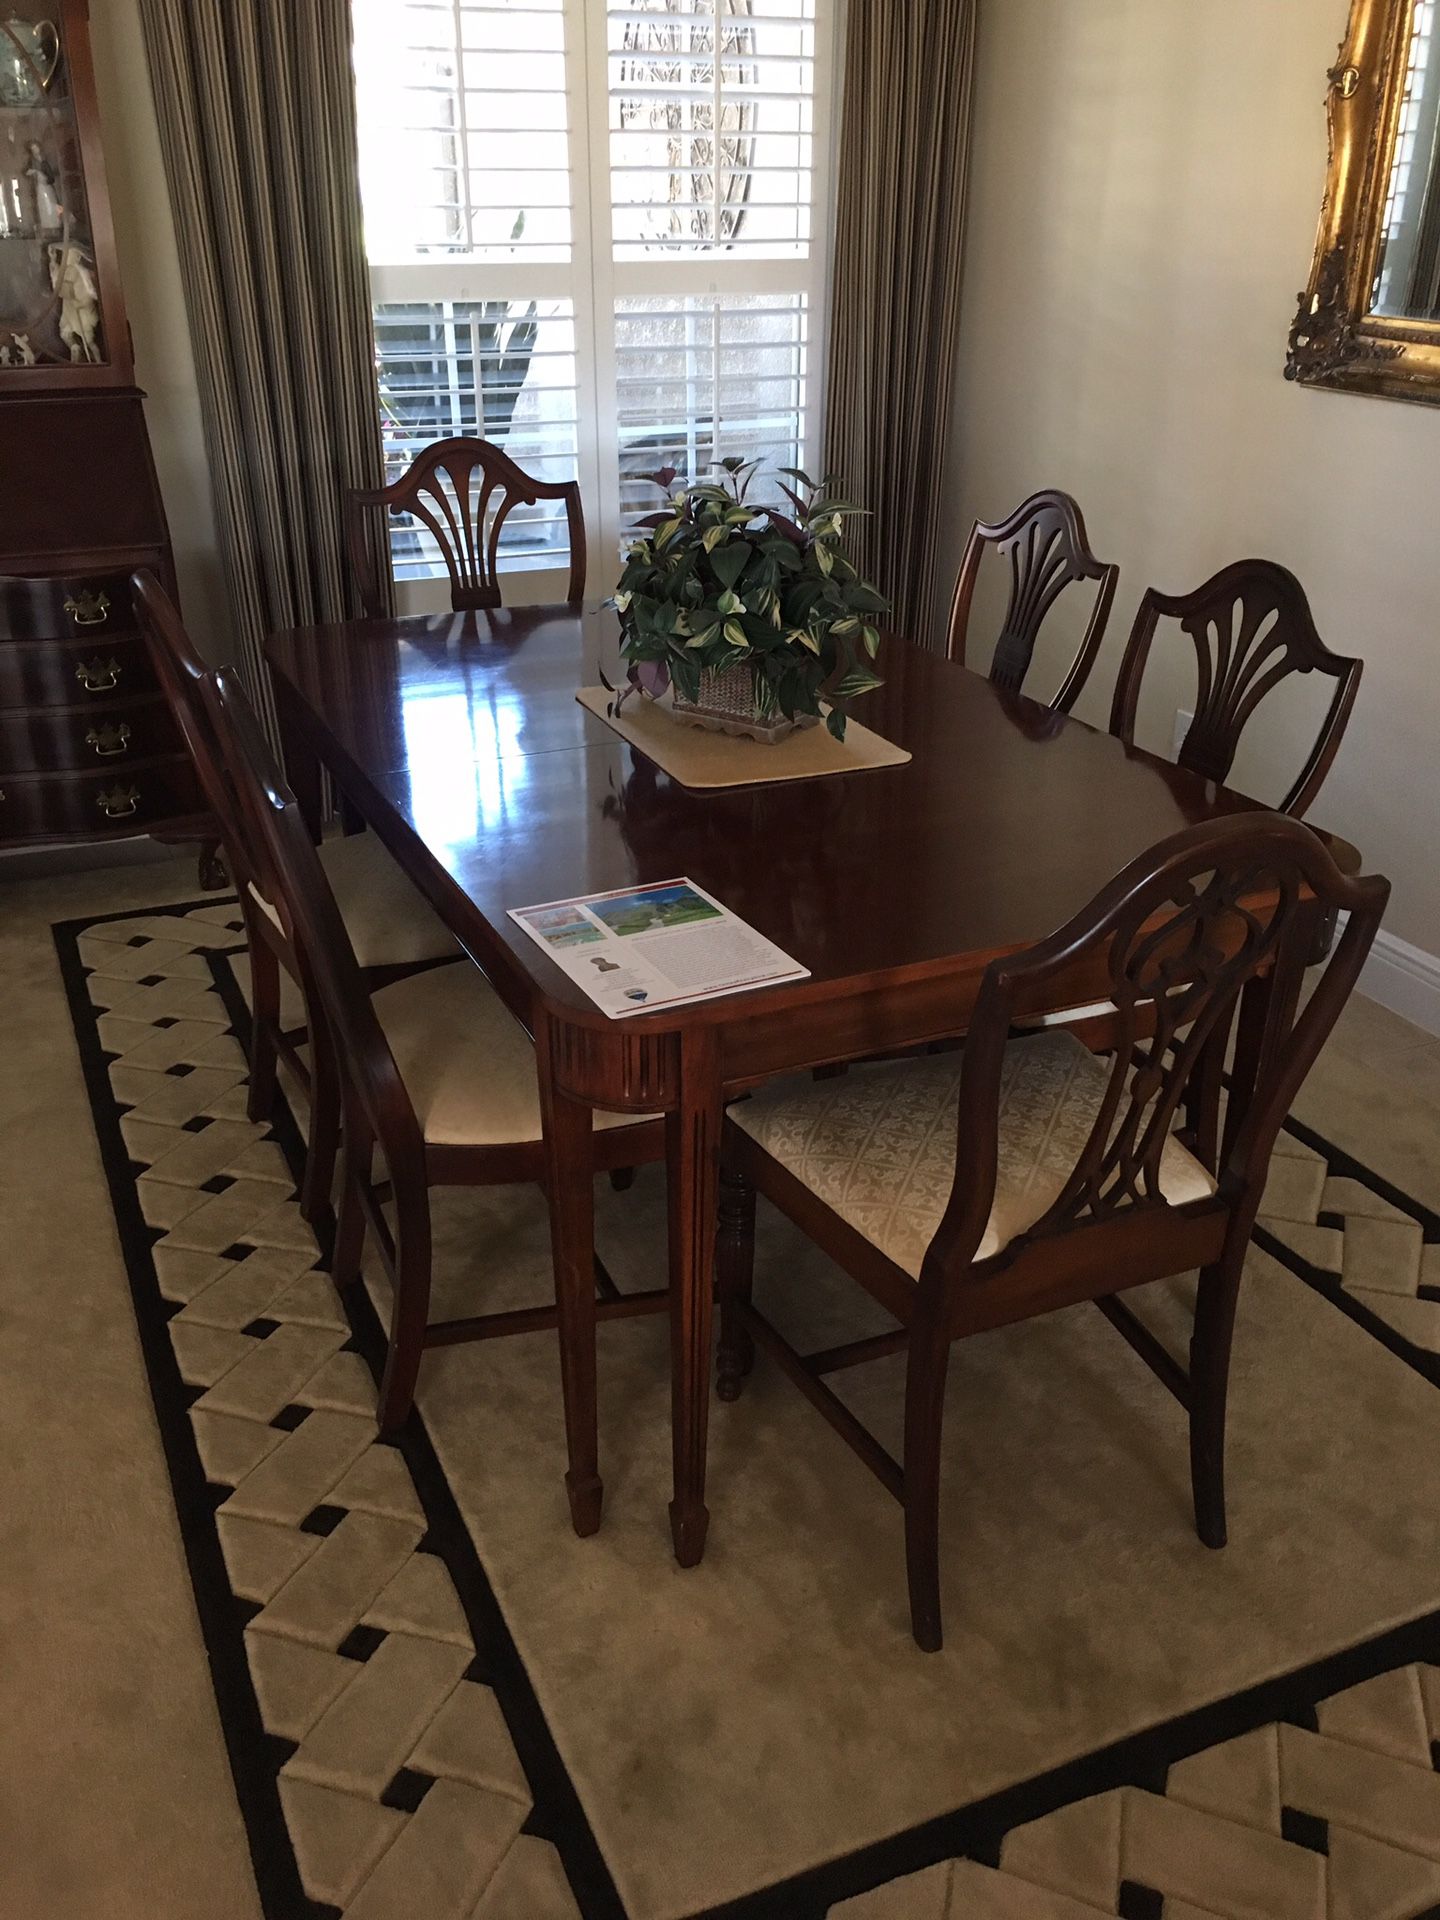 Duncan Phyfe style dining room table and 6 chairs. Includes one leaf and protective cover. Seats need recovering.